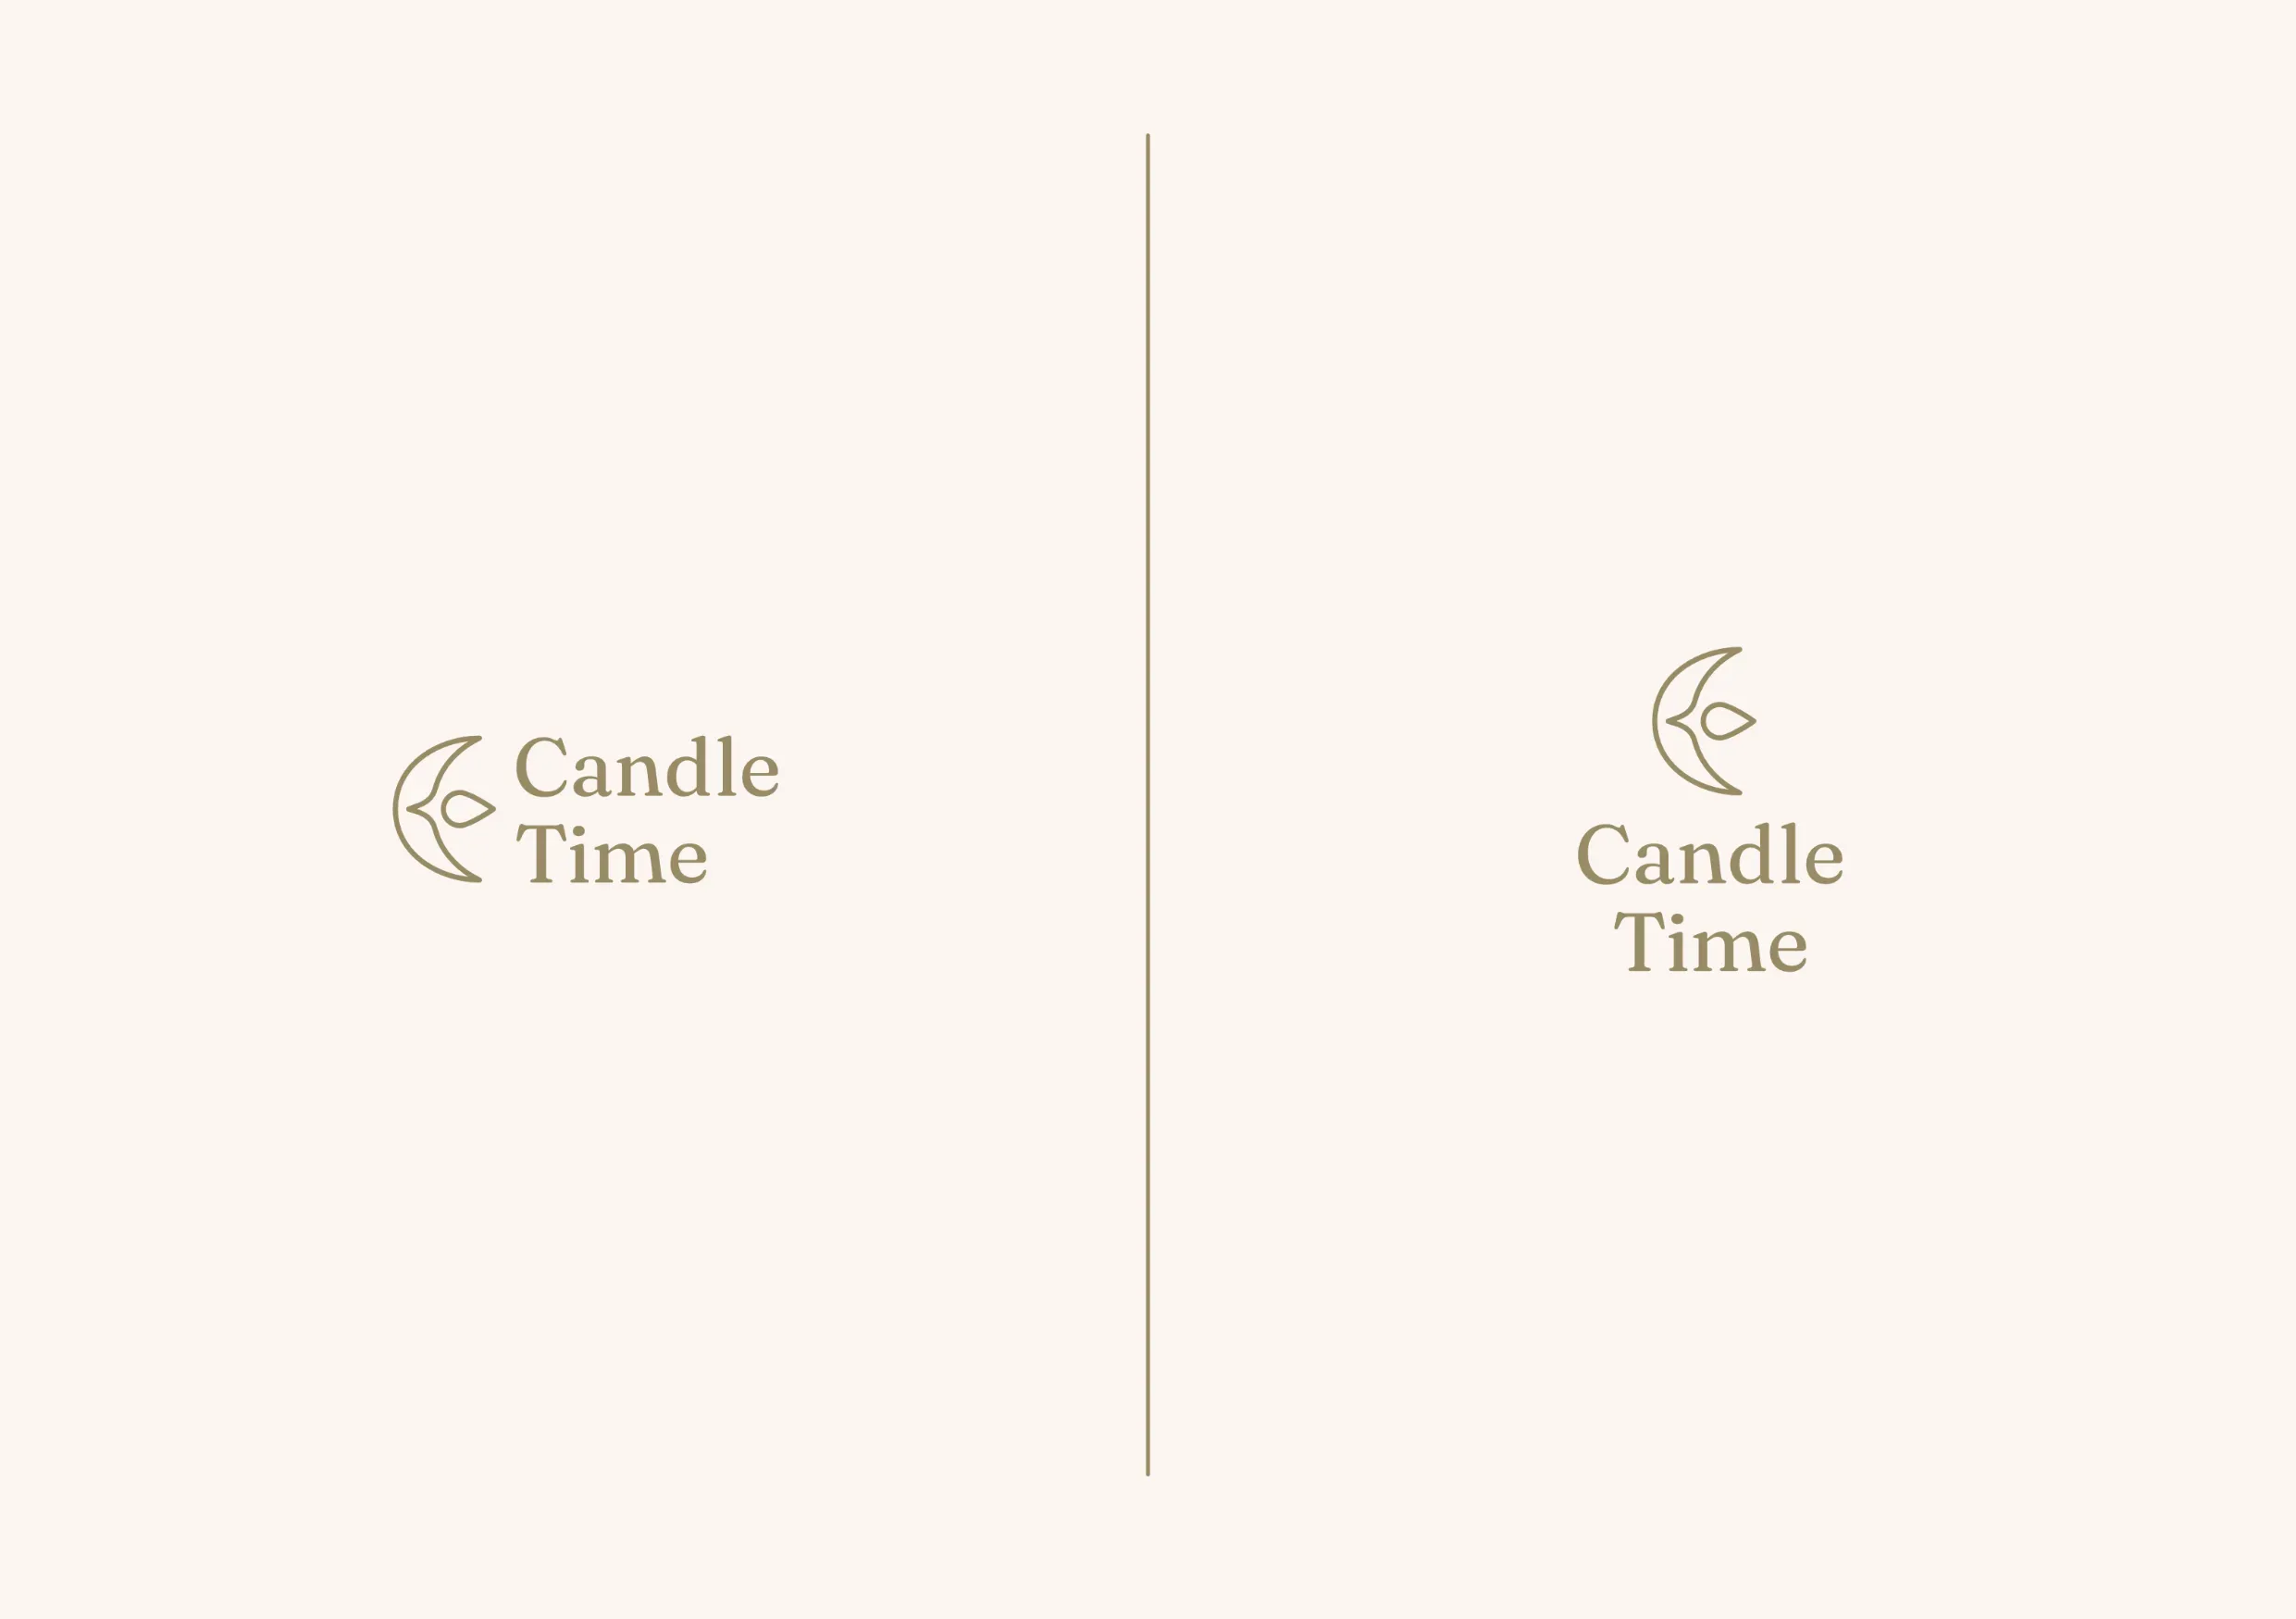 Candle Time logo variations